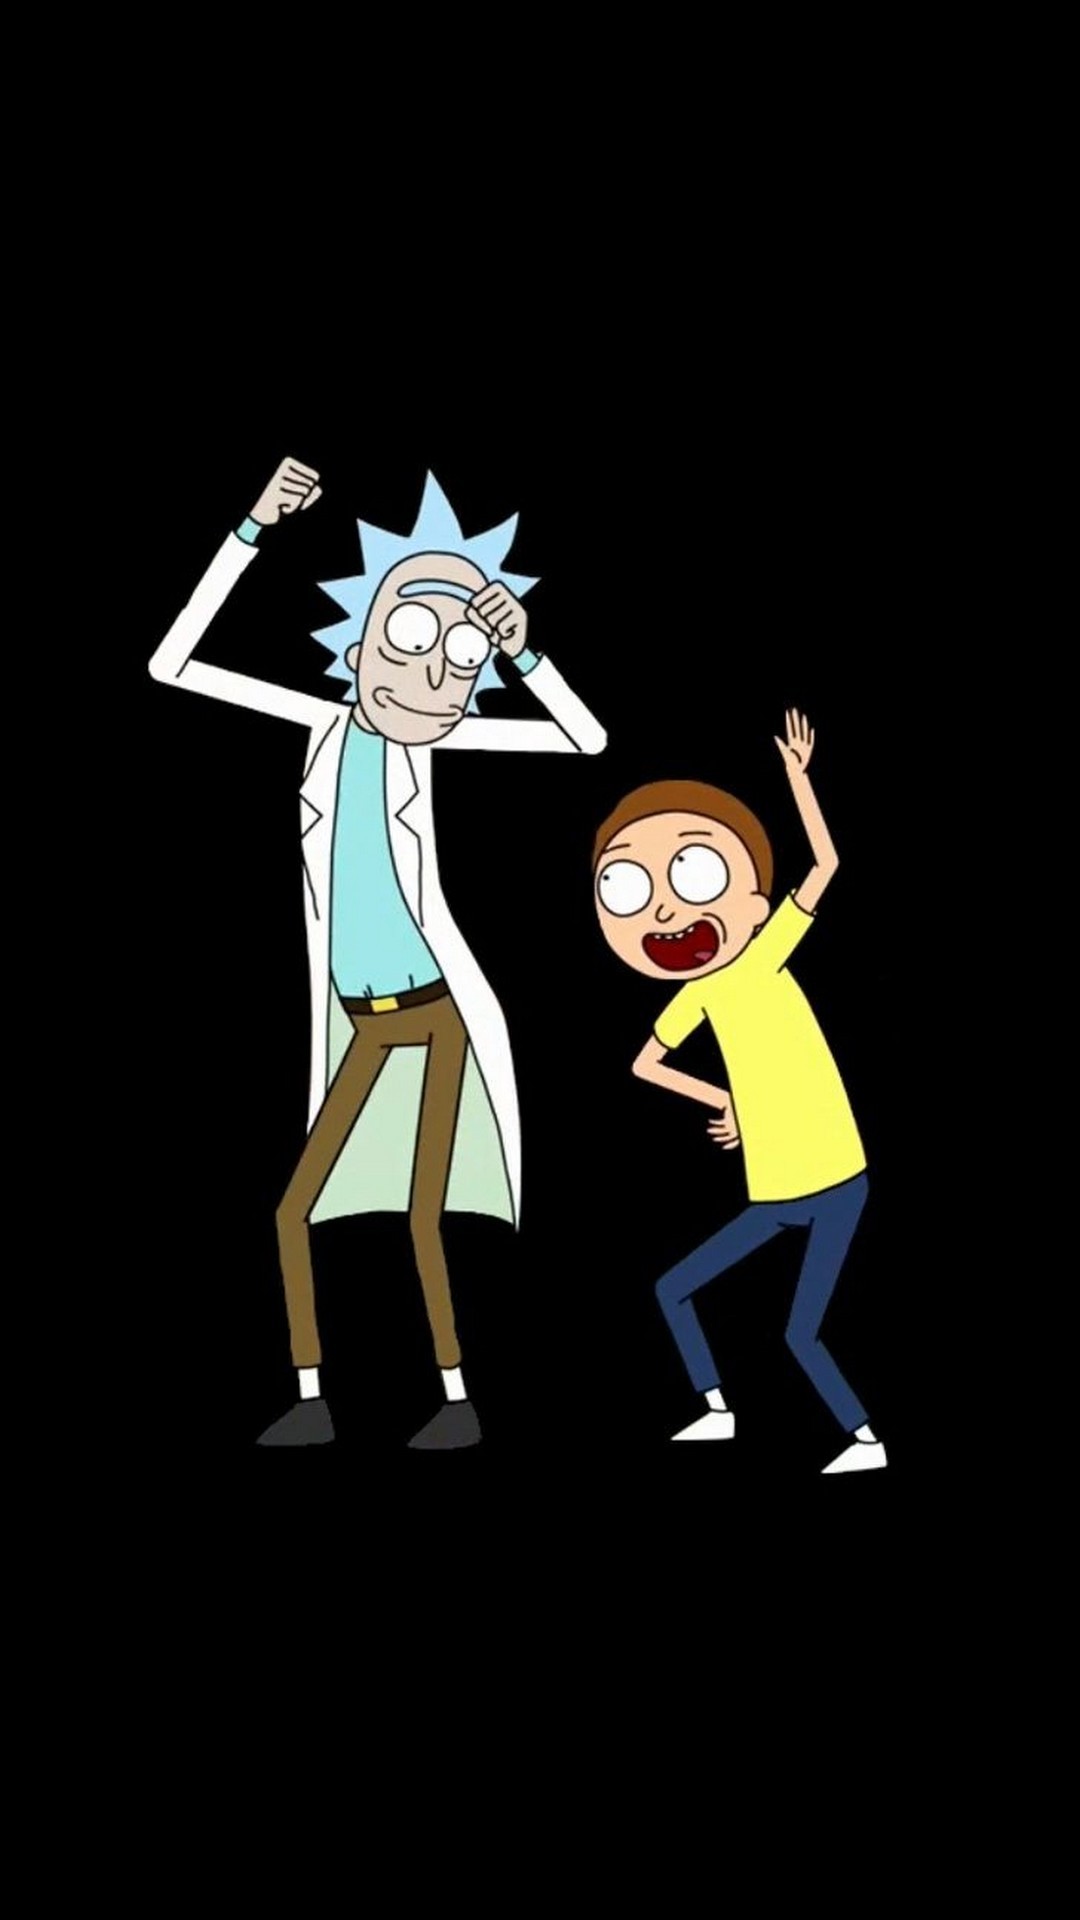 Wallpaper Rick and Morty iPhone with resolution 1080X1920 pixel. You can use this wallpaper as background for your desktop Computer Screensavers, Android or iPhone smartphones